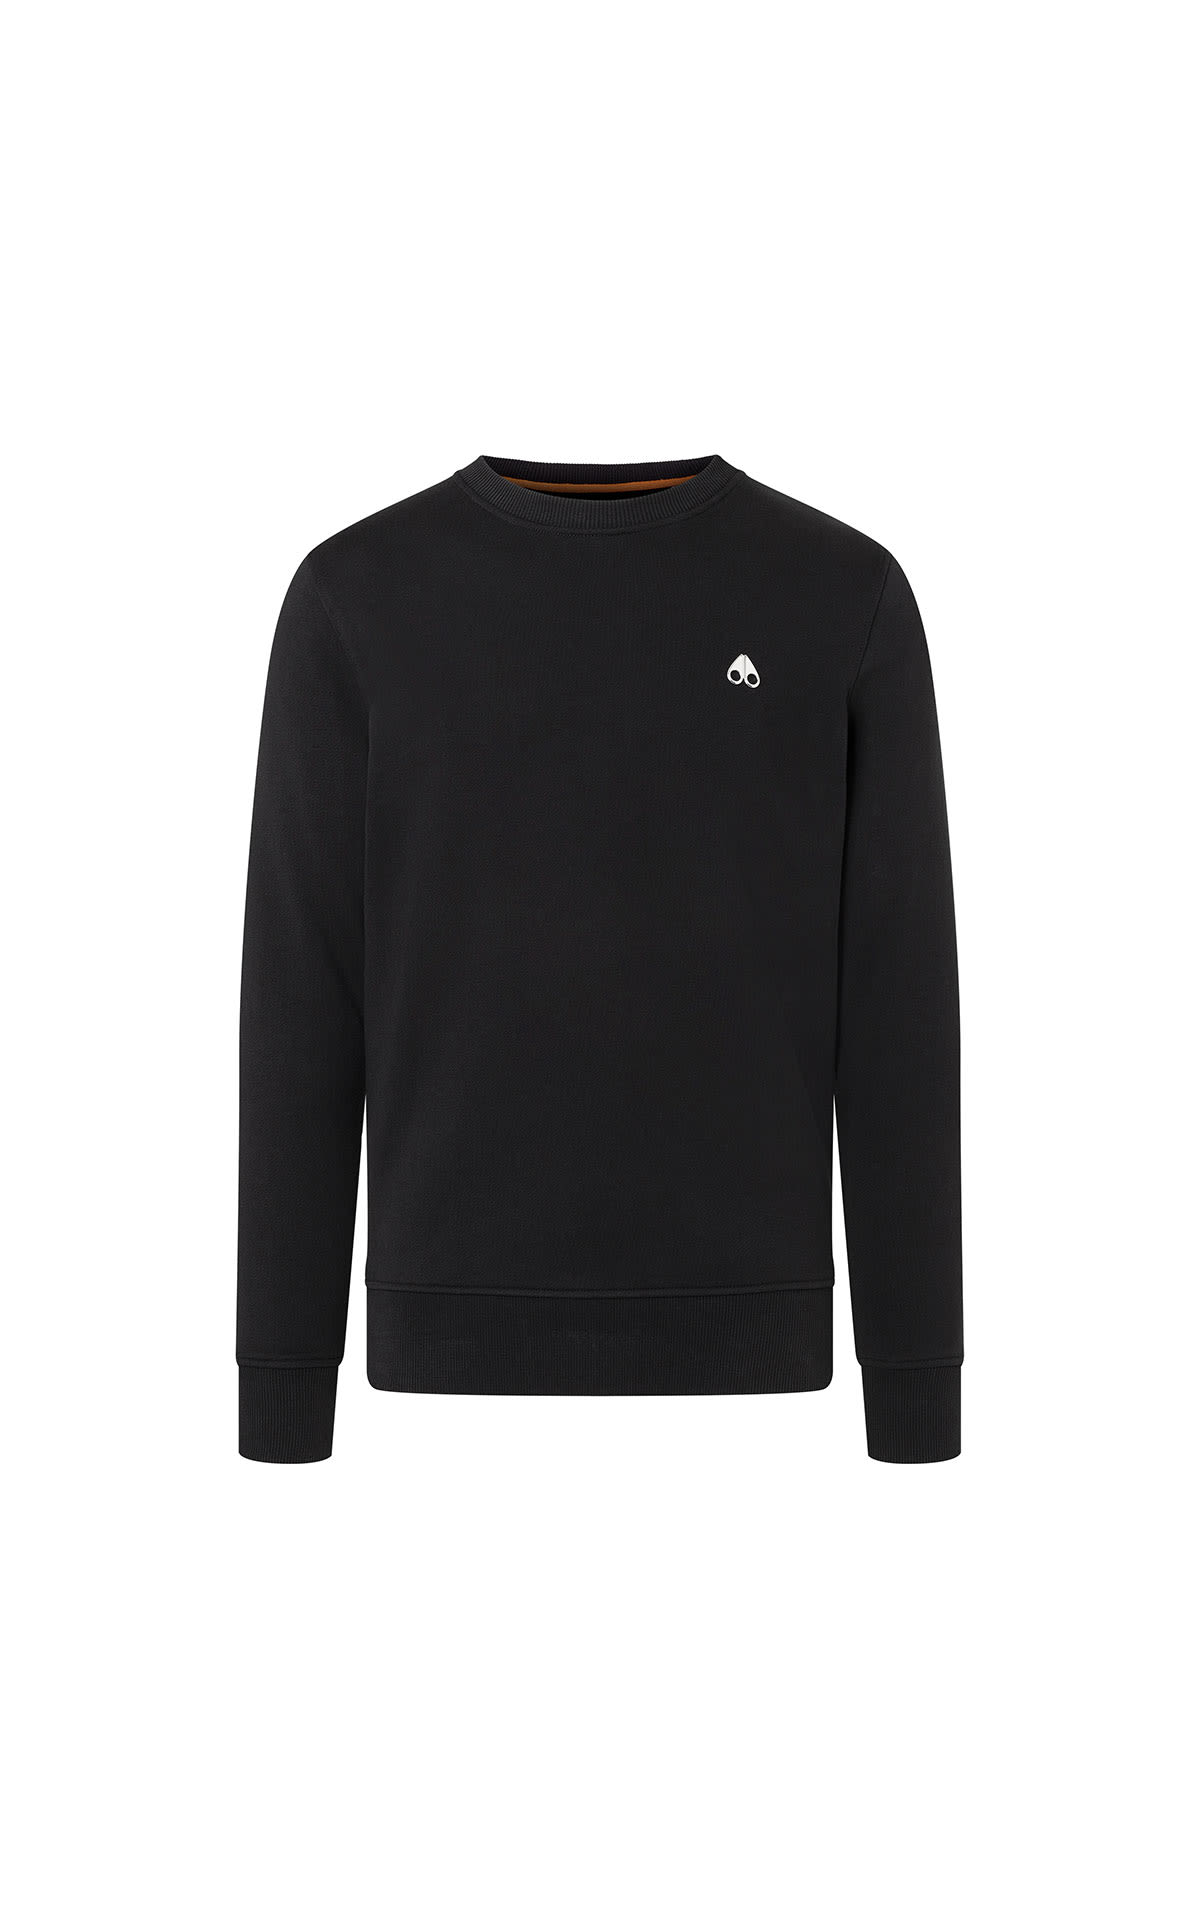 Moose Knuckles Greyfield pullover from Bicester Village